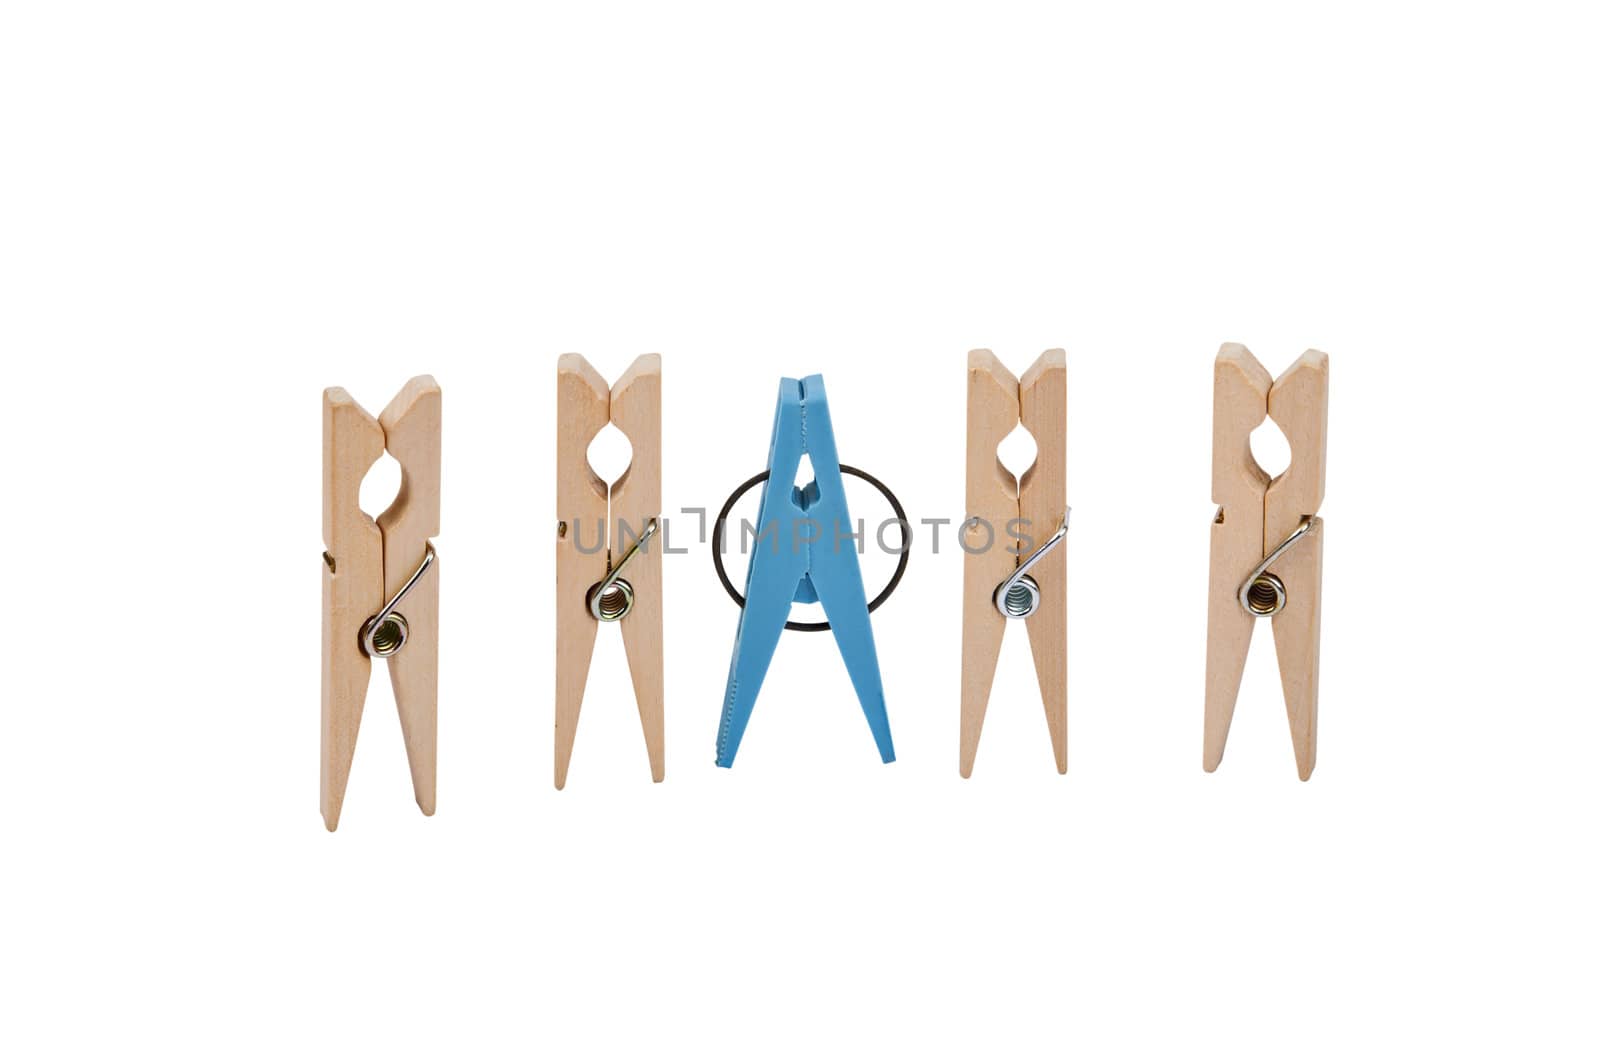 Closeup of five clothespins placed vertically in line. Four clothespins - wood, in the center is a blue plastic clothespins. Image is isolated on white and the file includes a clipping path.